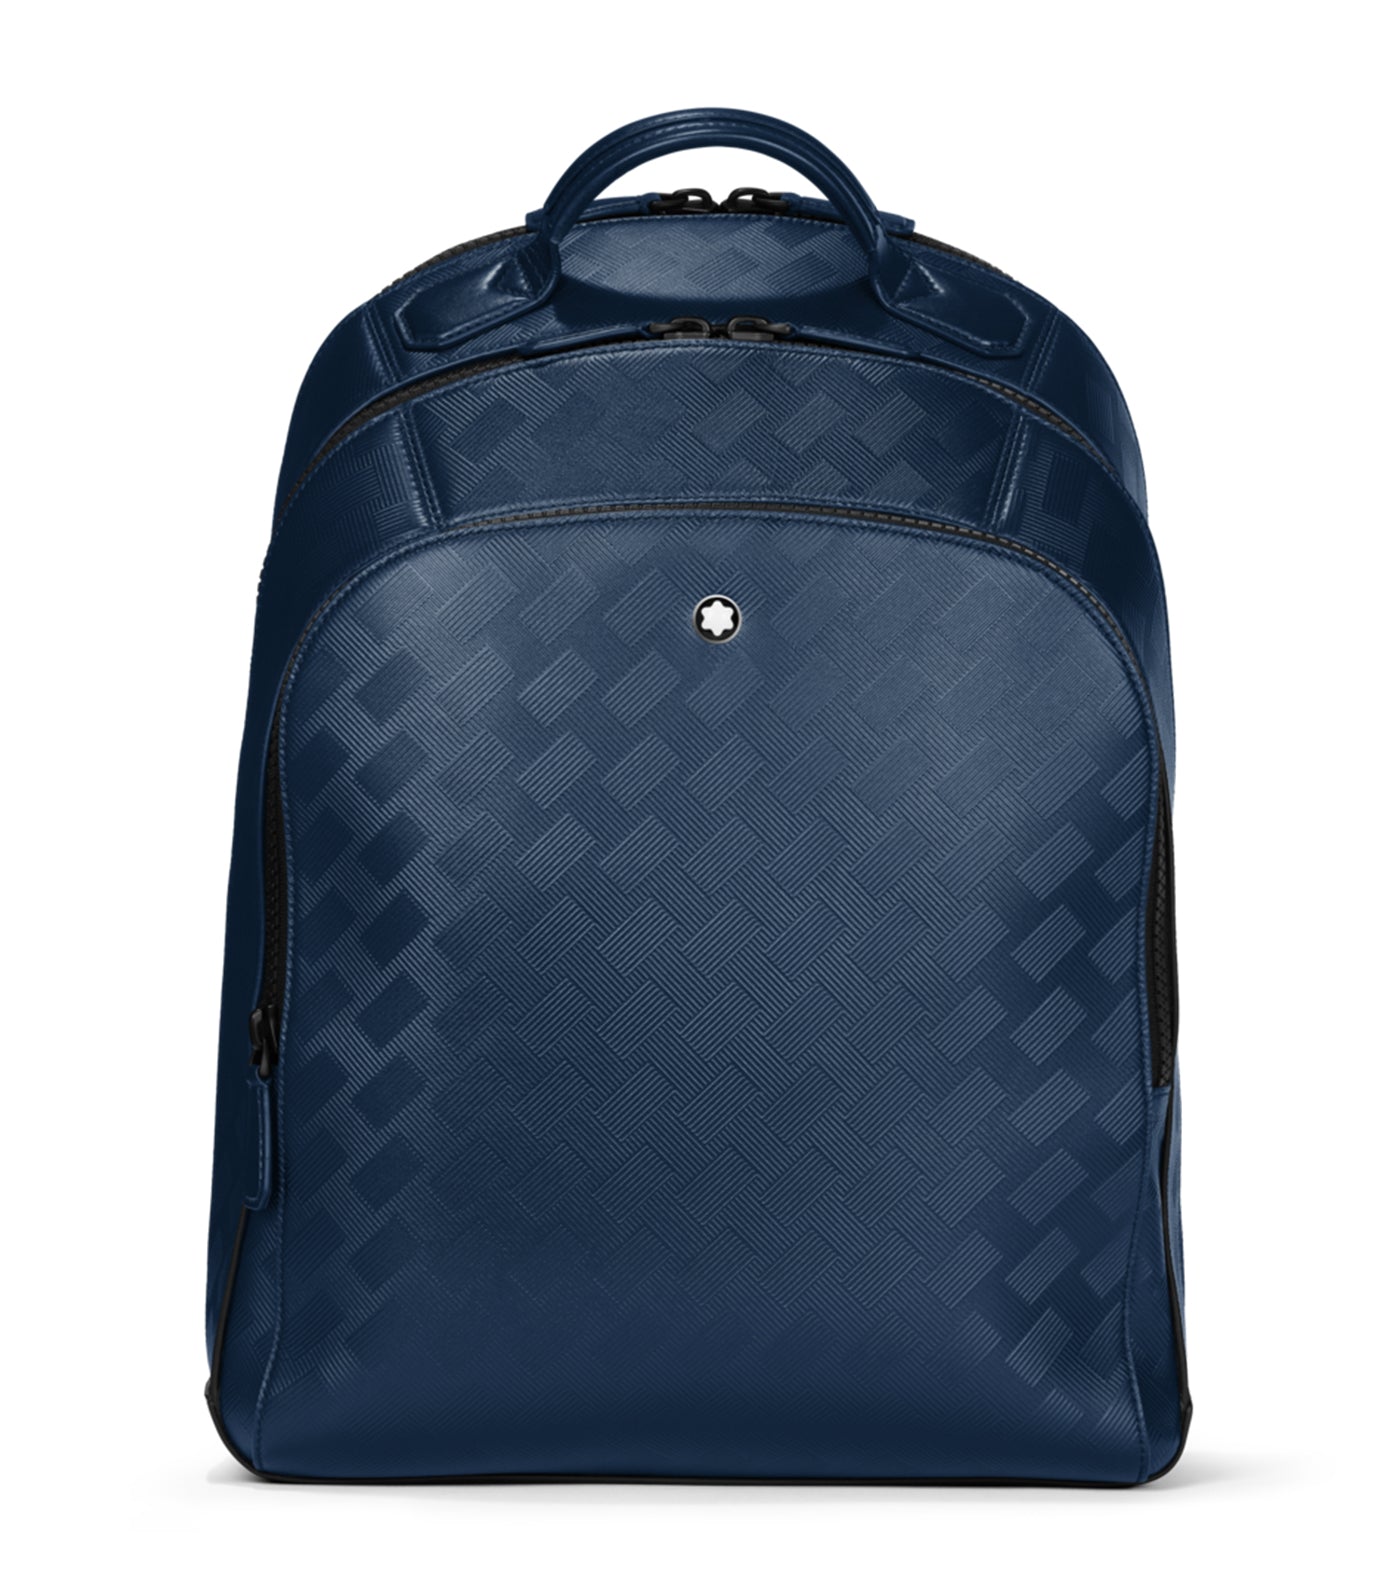 Extreme 3.0 Medium Backpack 3 Compartments Blue